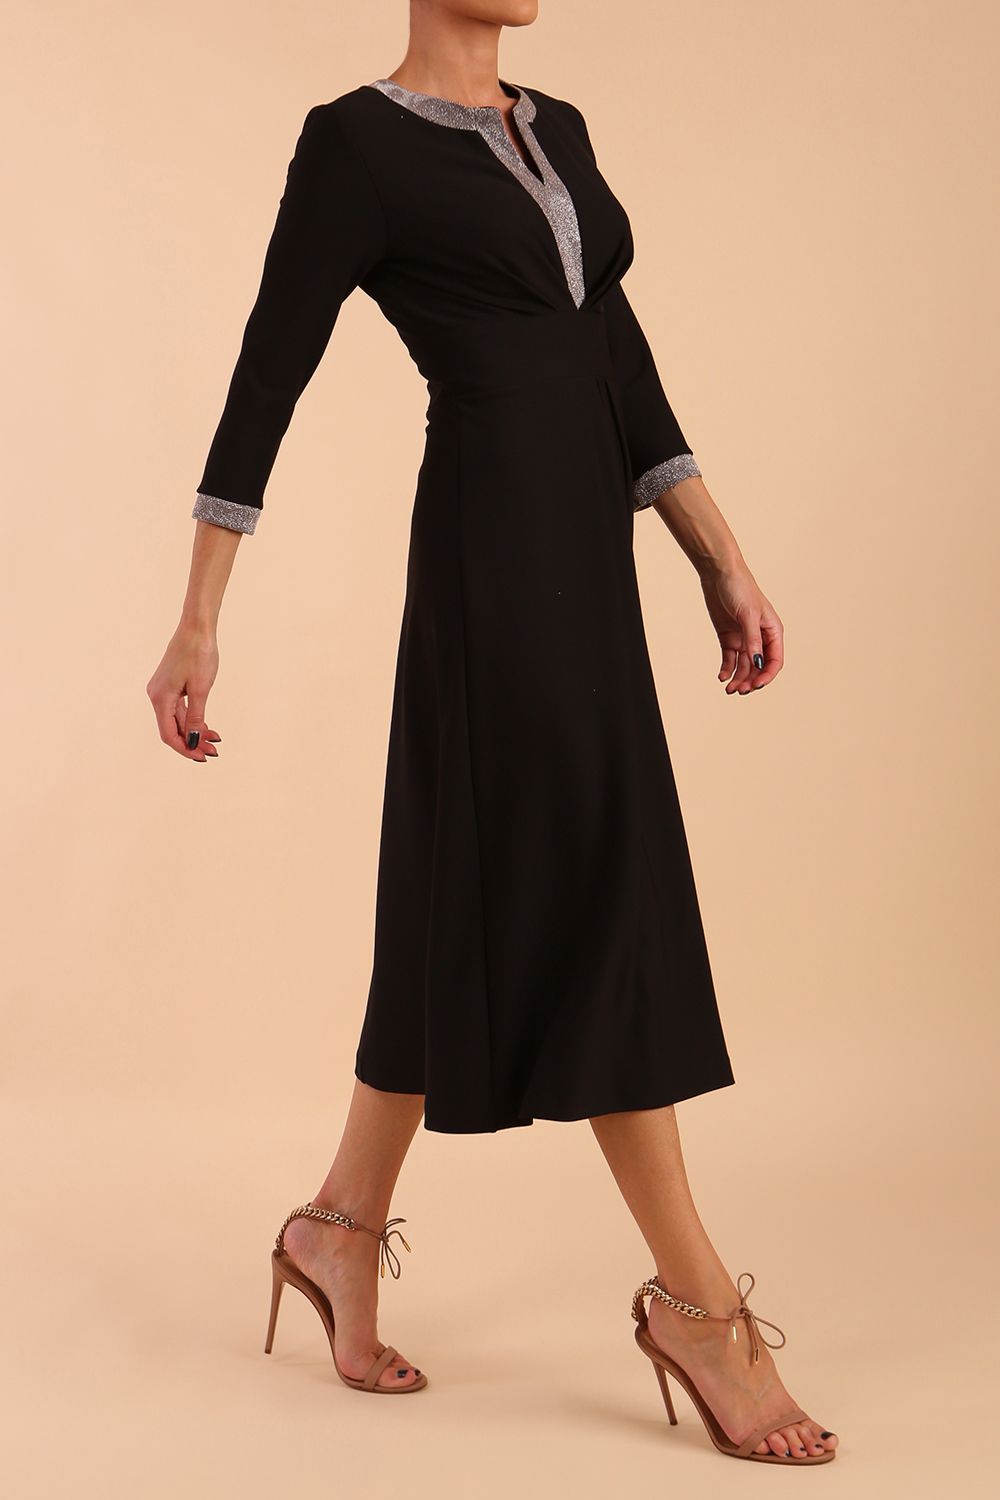 model is wearing diva catwalk carolyn swing midi dress with a band and glitter detail on sleeves and around the neckline in black side